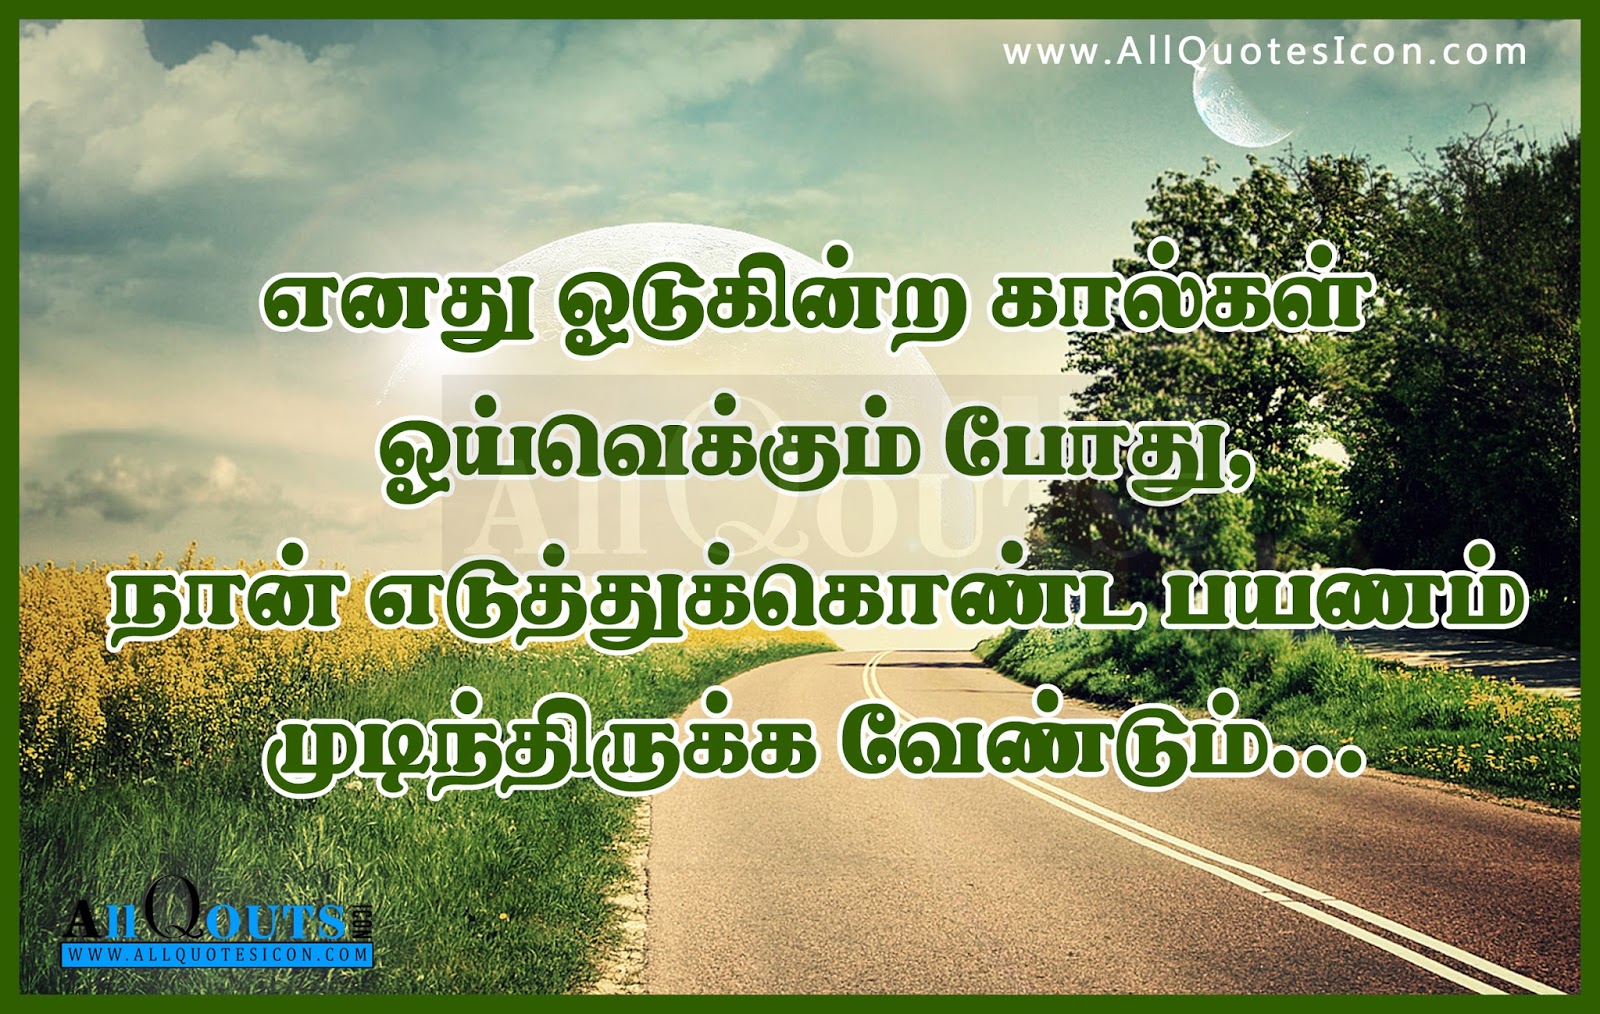 Tamil Life Quotes Motivation Inspiration Thoughts Sayings